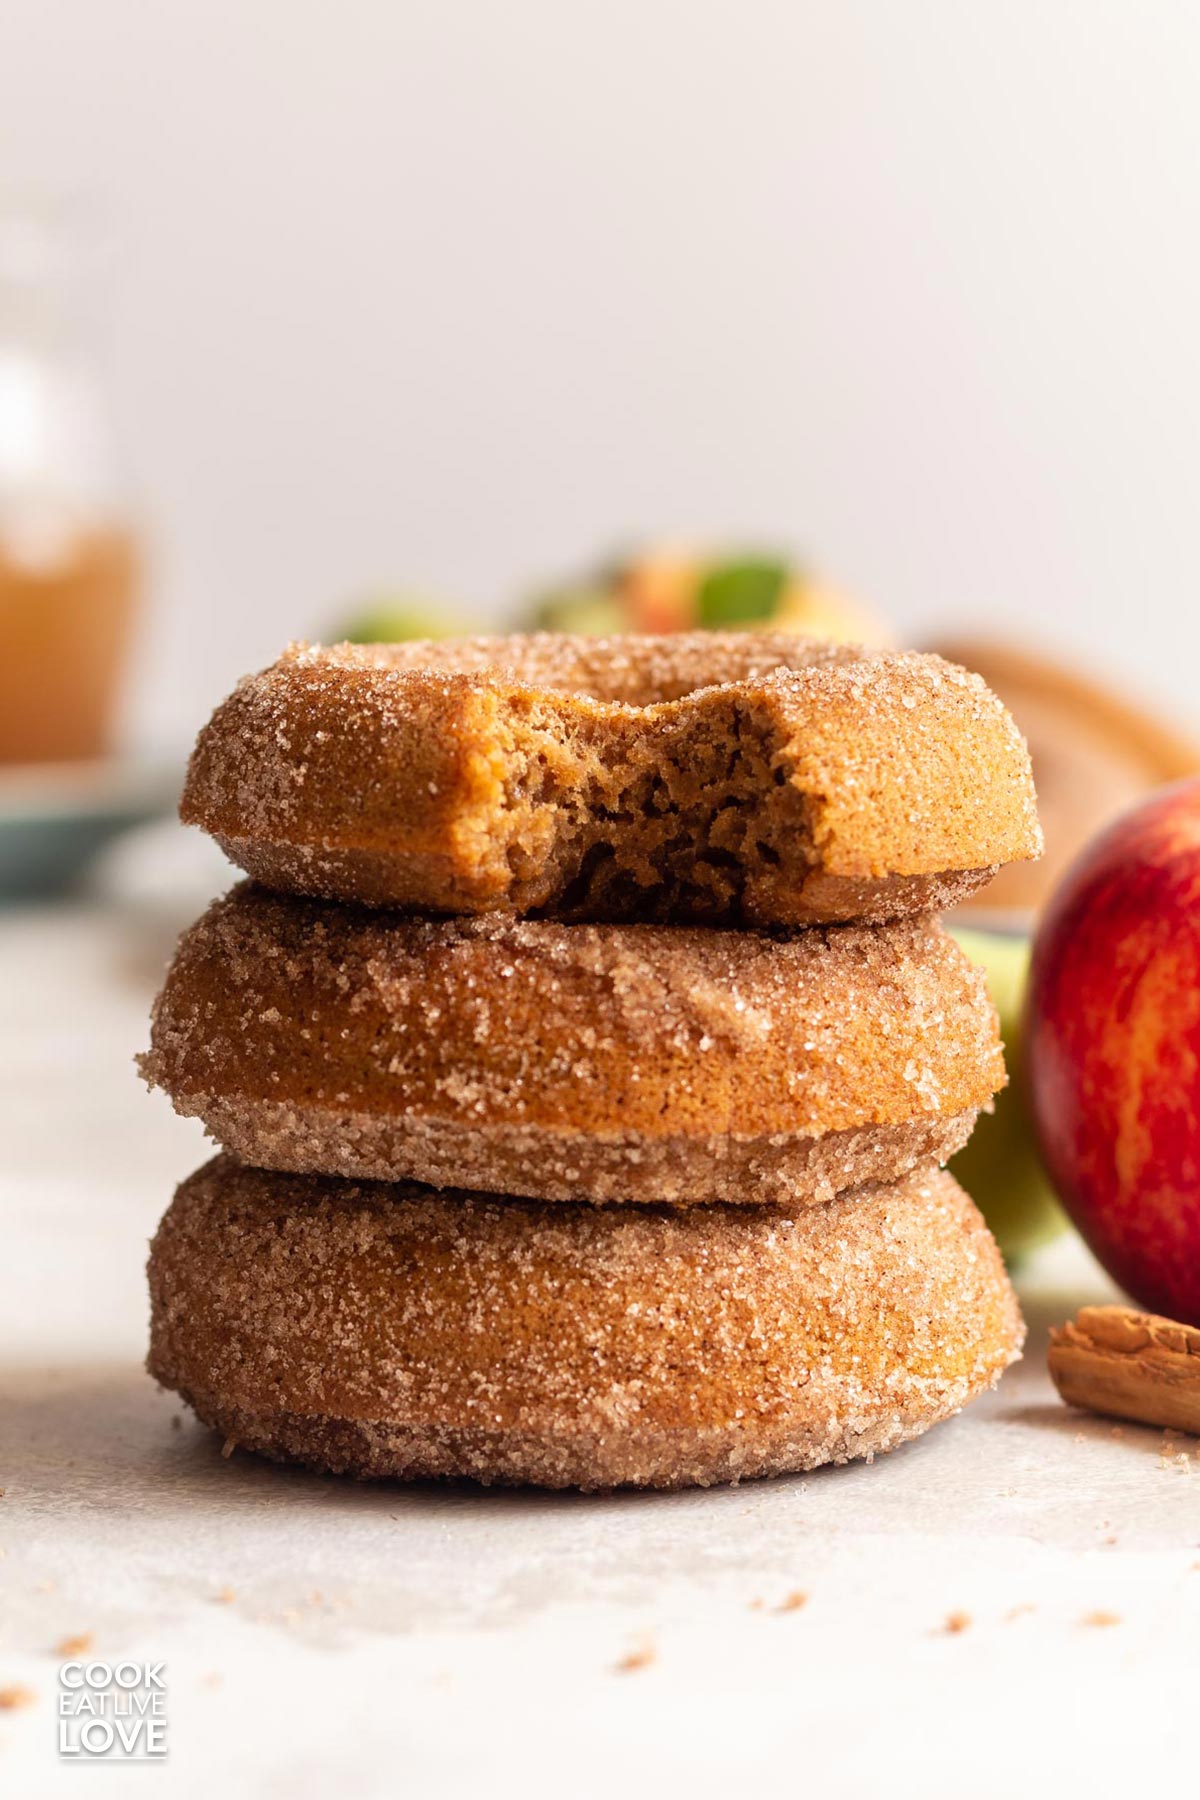 Three vegan apple cider doughnuts in a stack with one missing a bite.